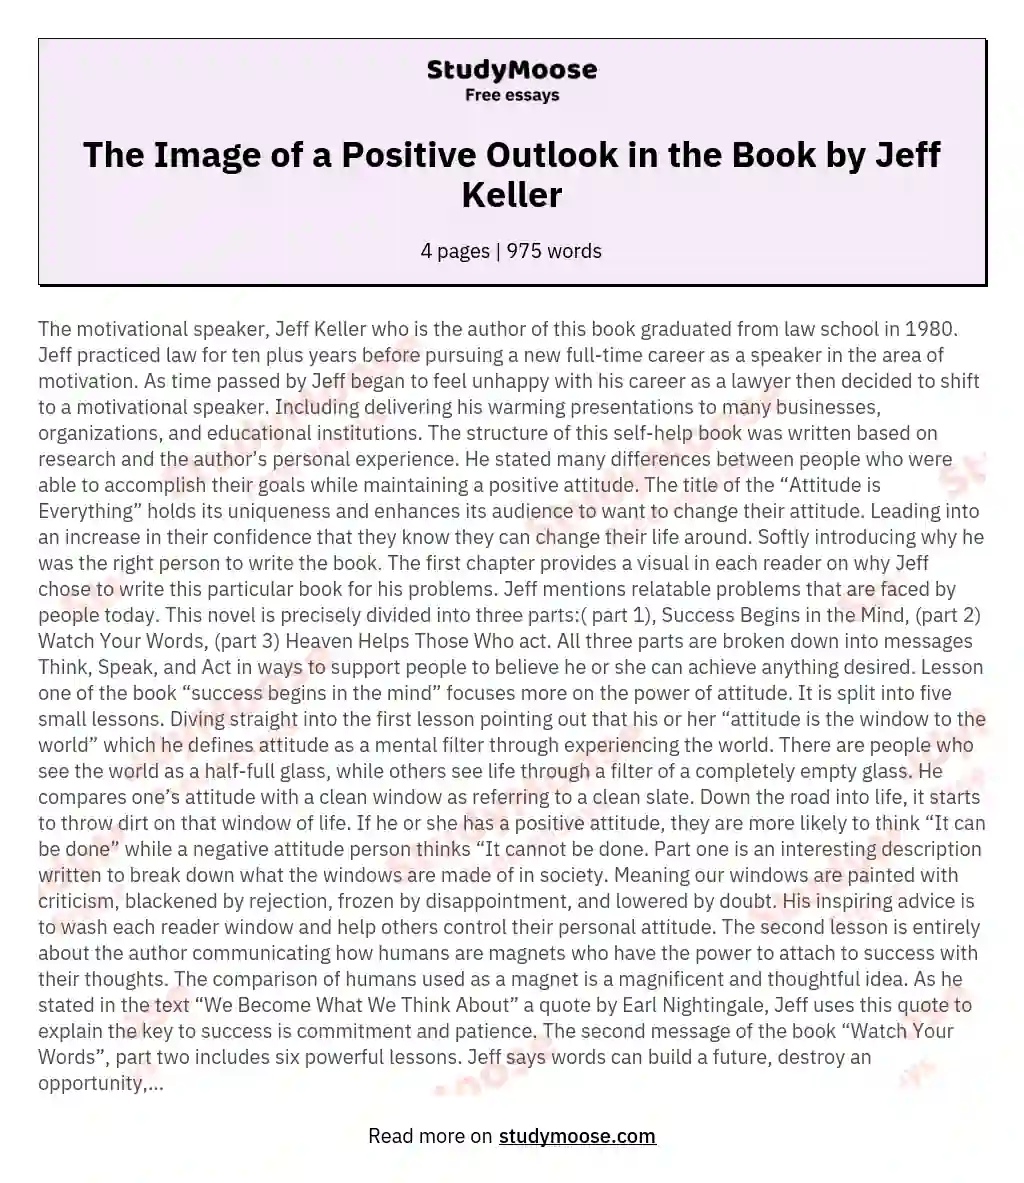 The Image of a Positive Outlook in the Book by Jeff Keller essay